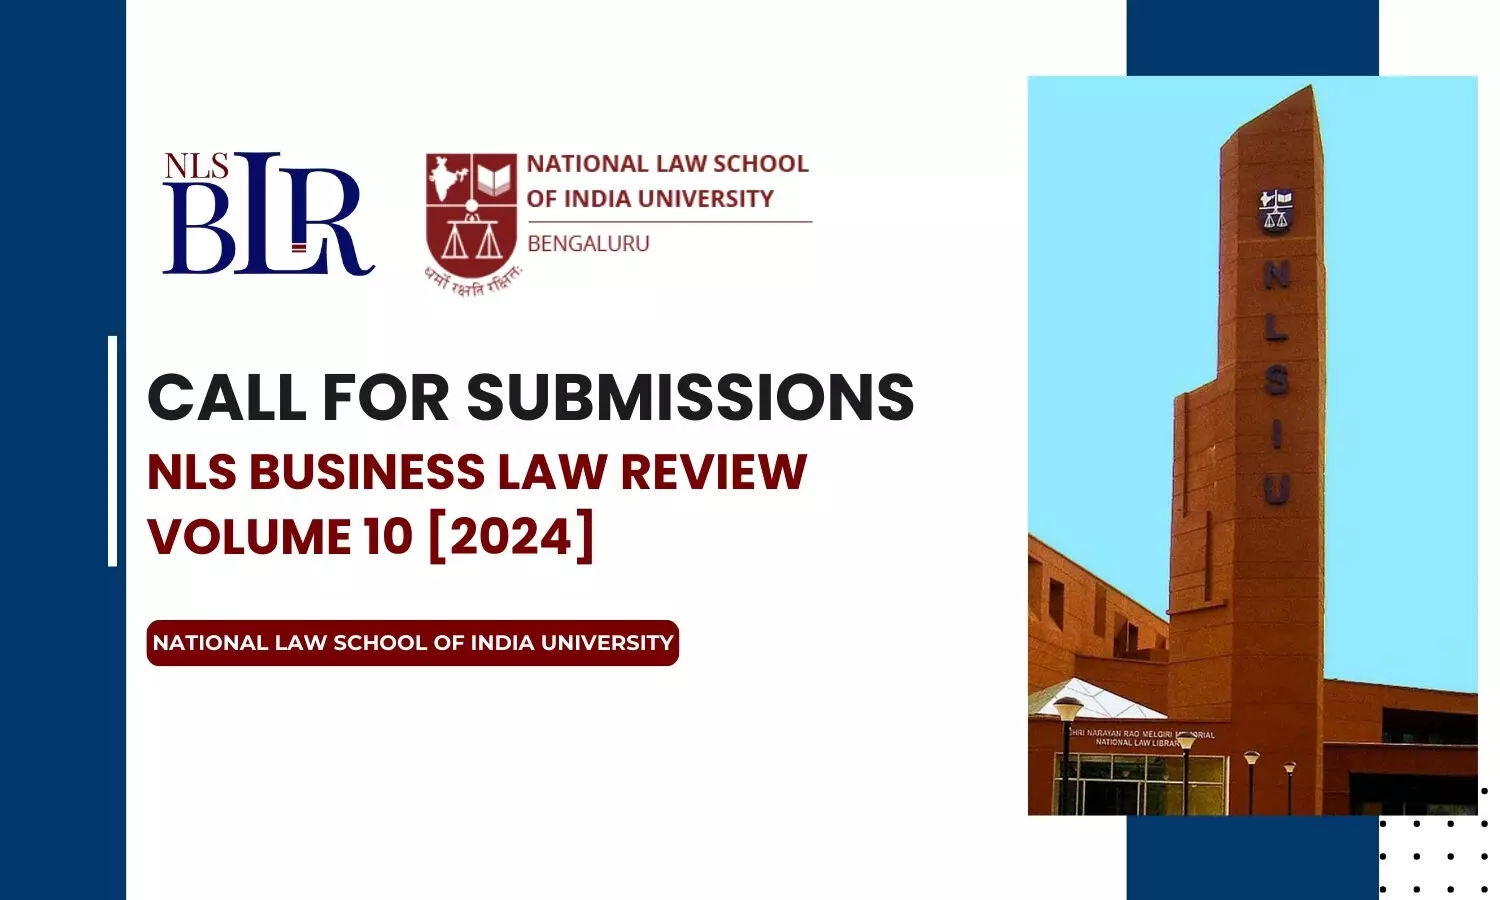 Call for Submissions NLS Business Law Review Volume 10 2024  NLSIU, Bangalore